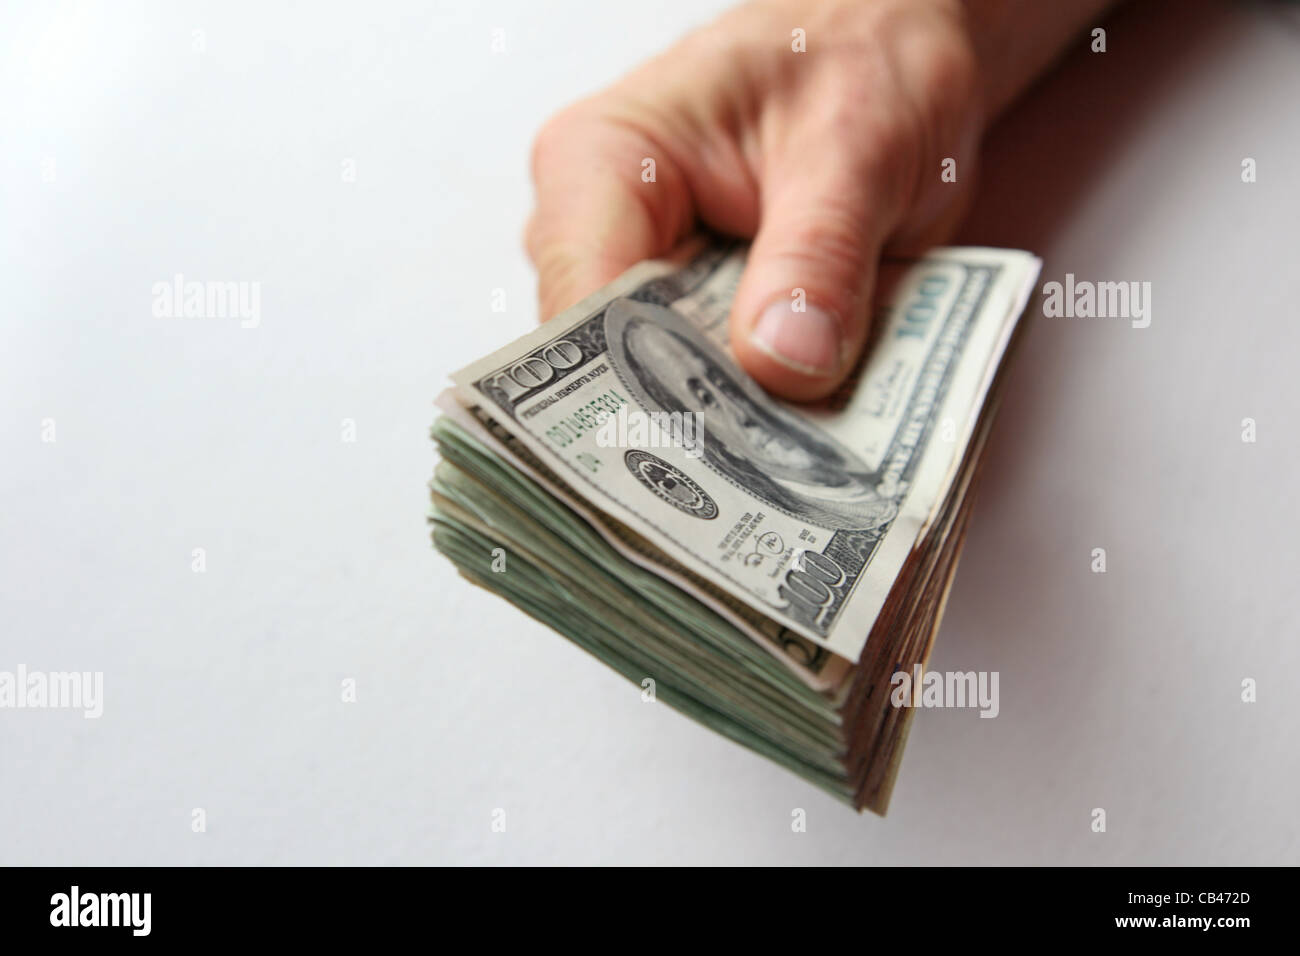 a man's hand holds a stack of US money with 100 dollar bill on top and shallow depth of field Stock Photo